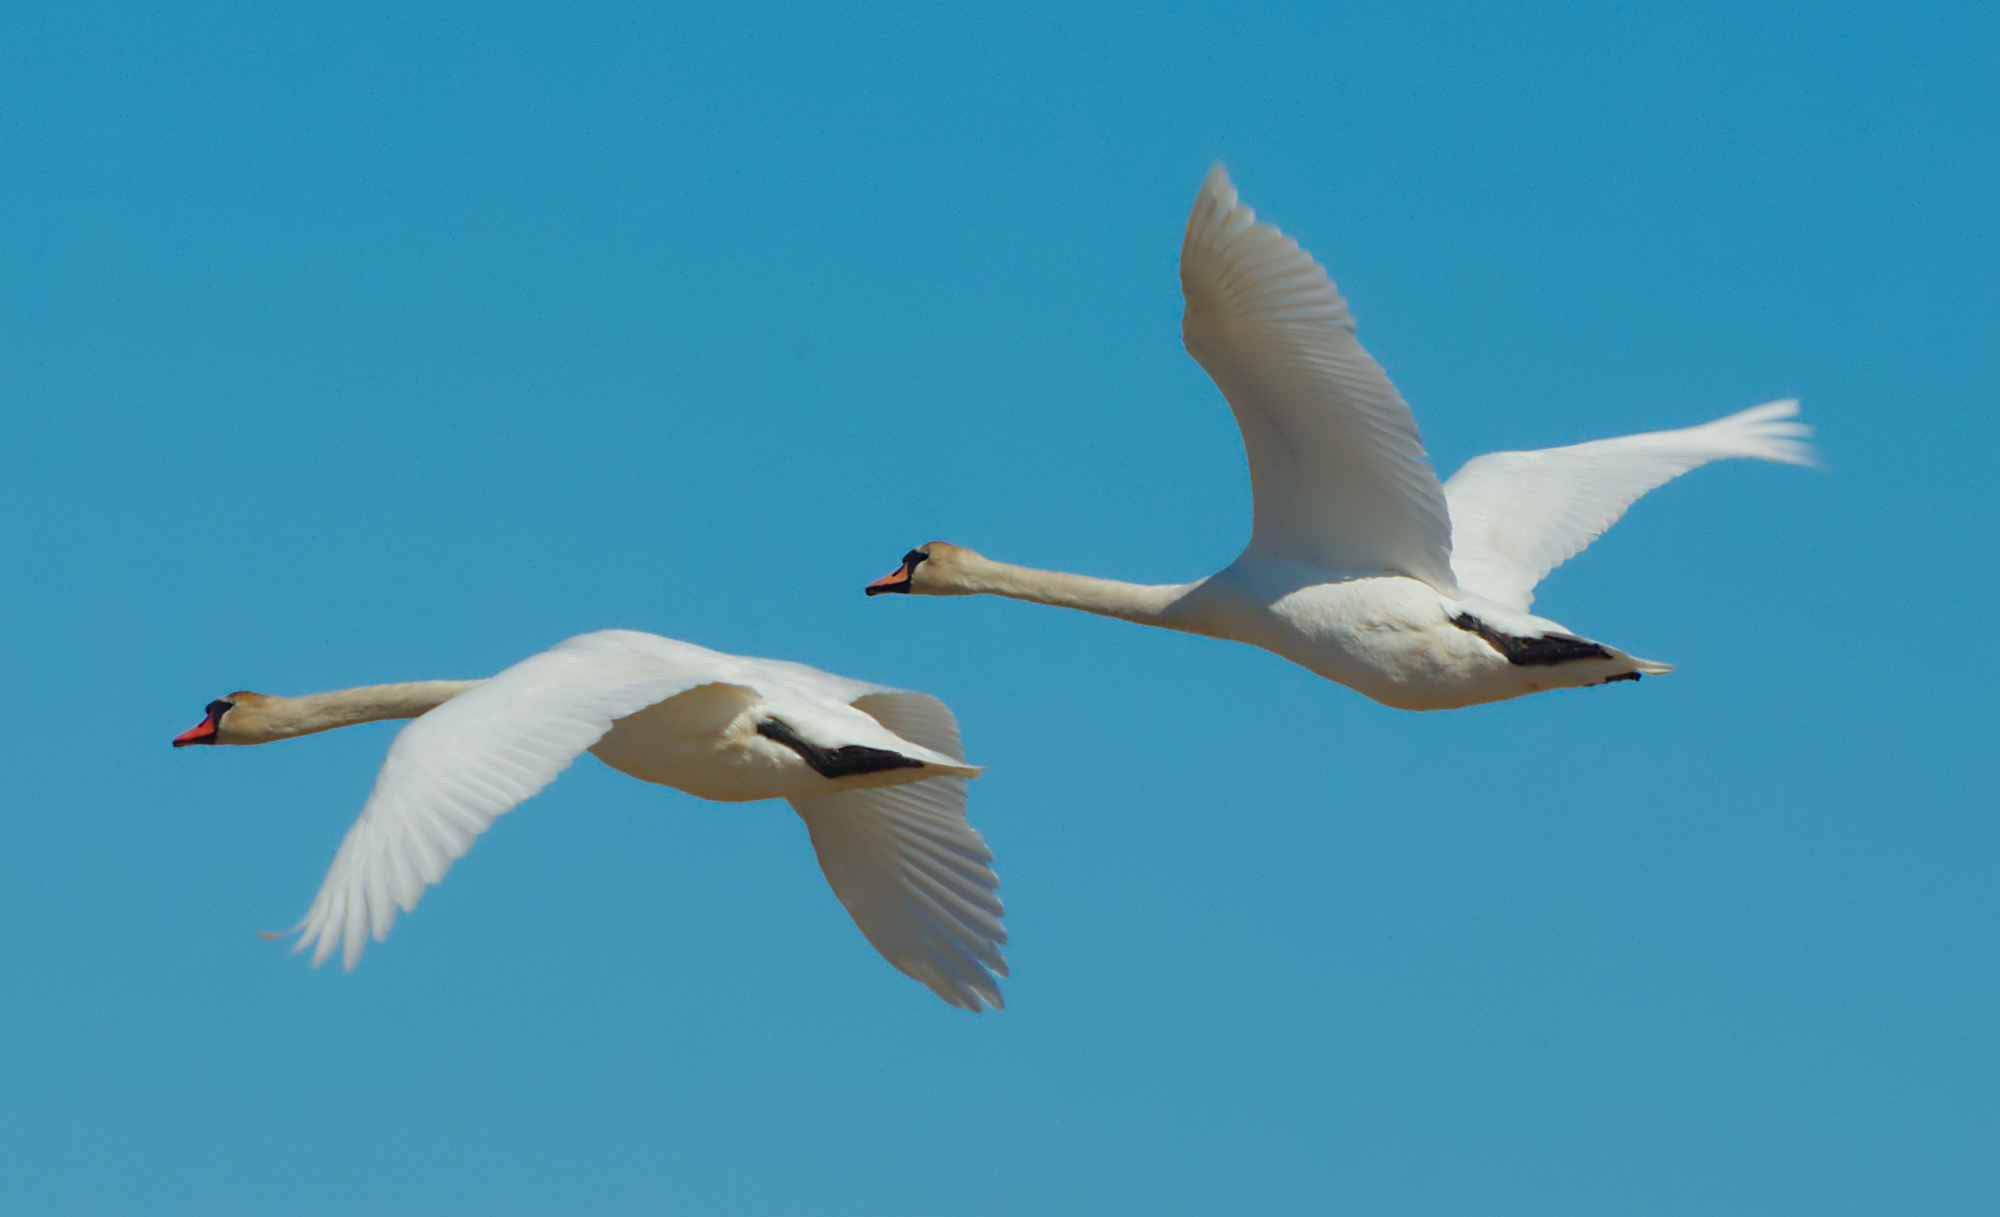 the two white swans are flying side by side